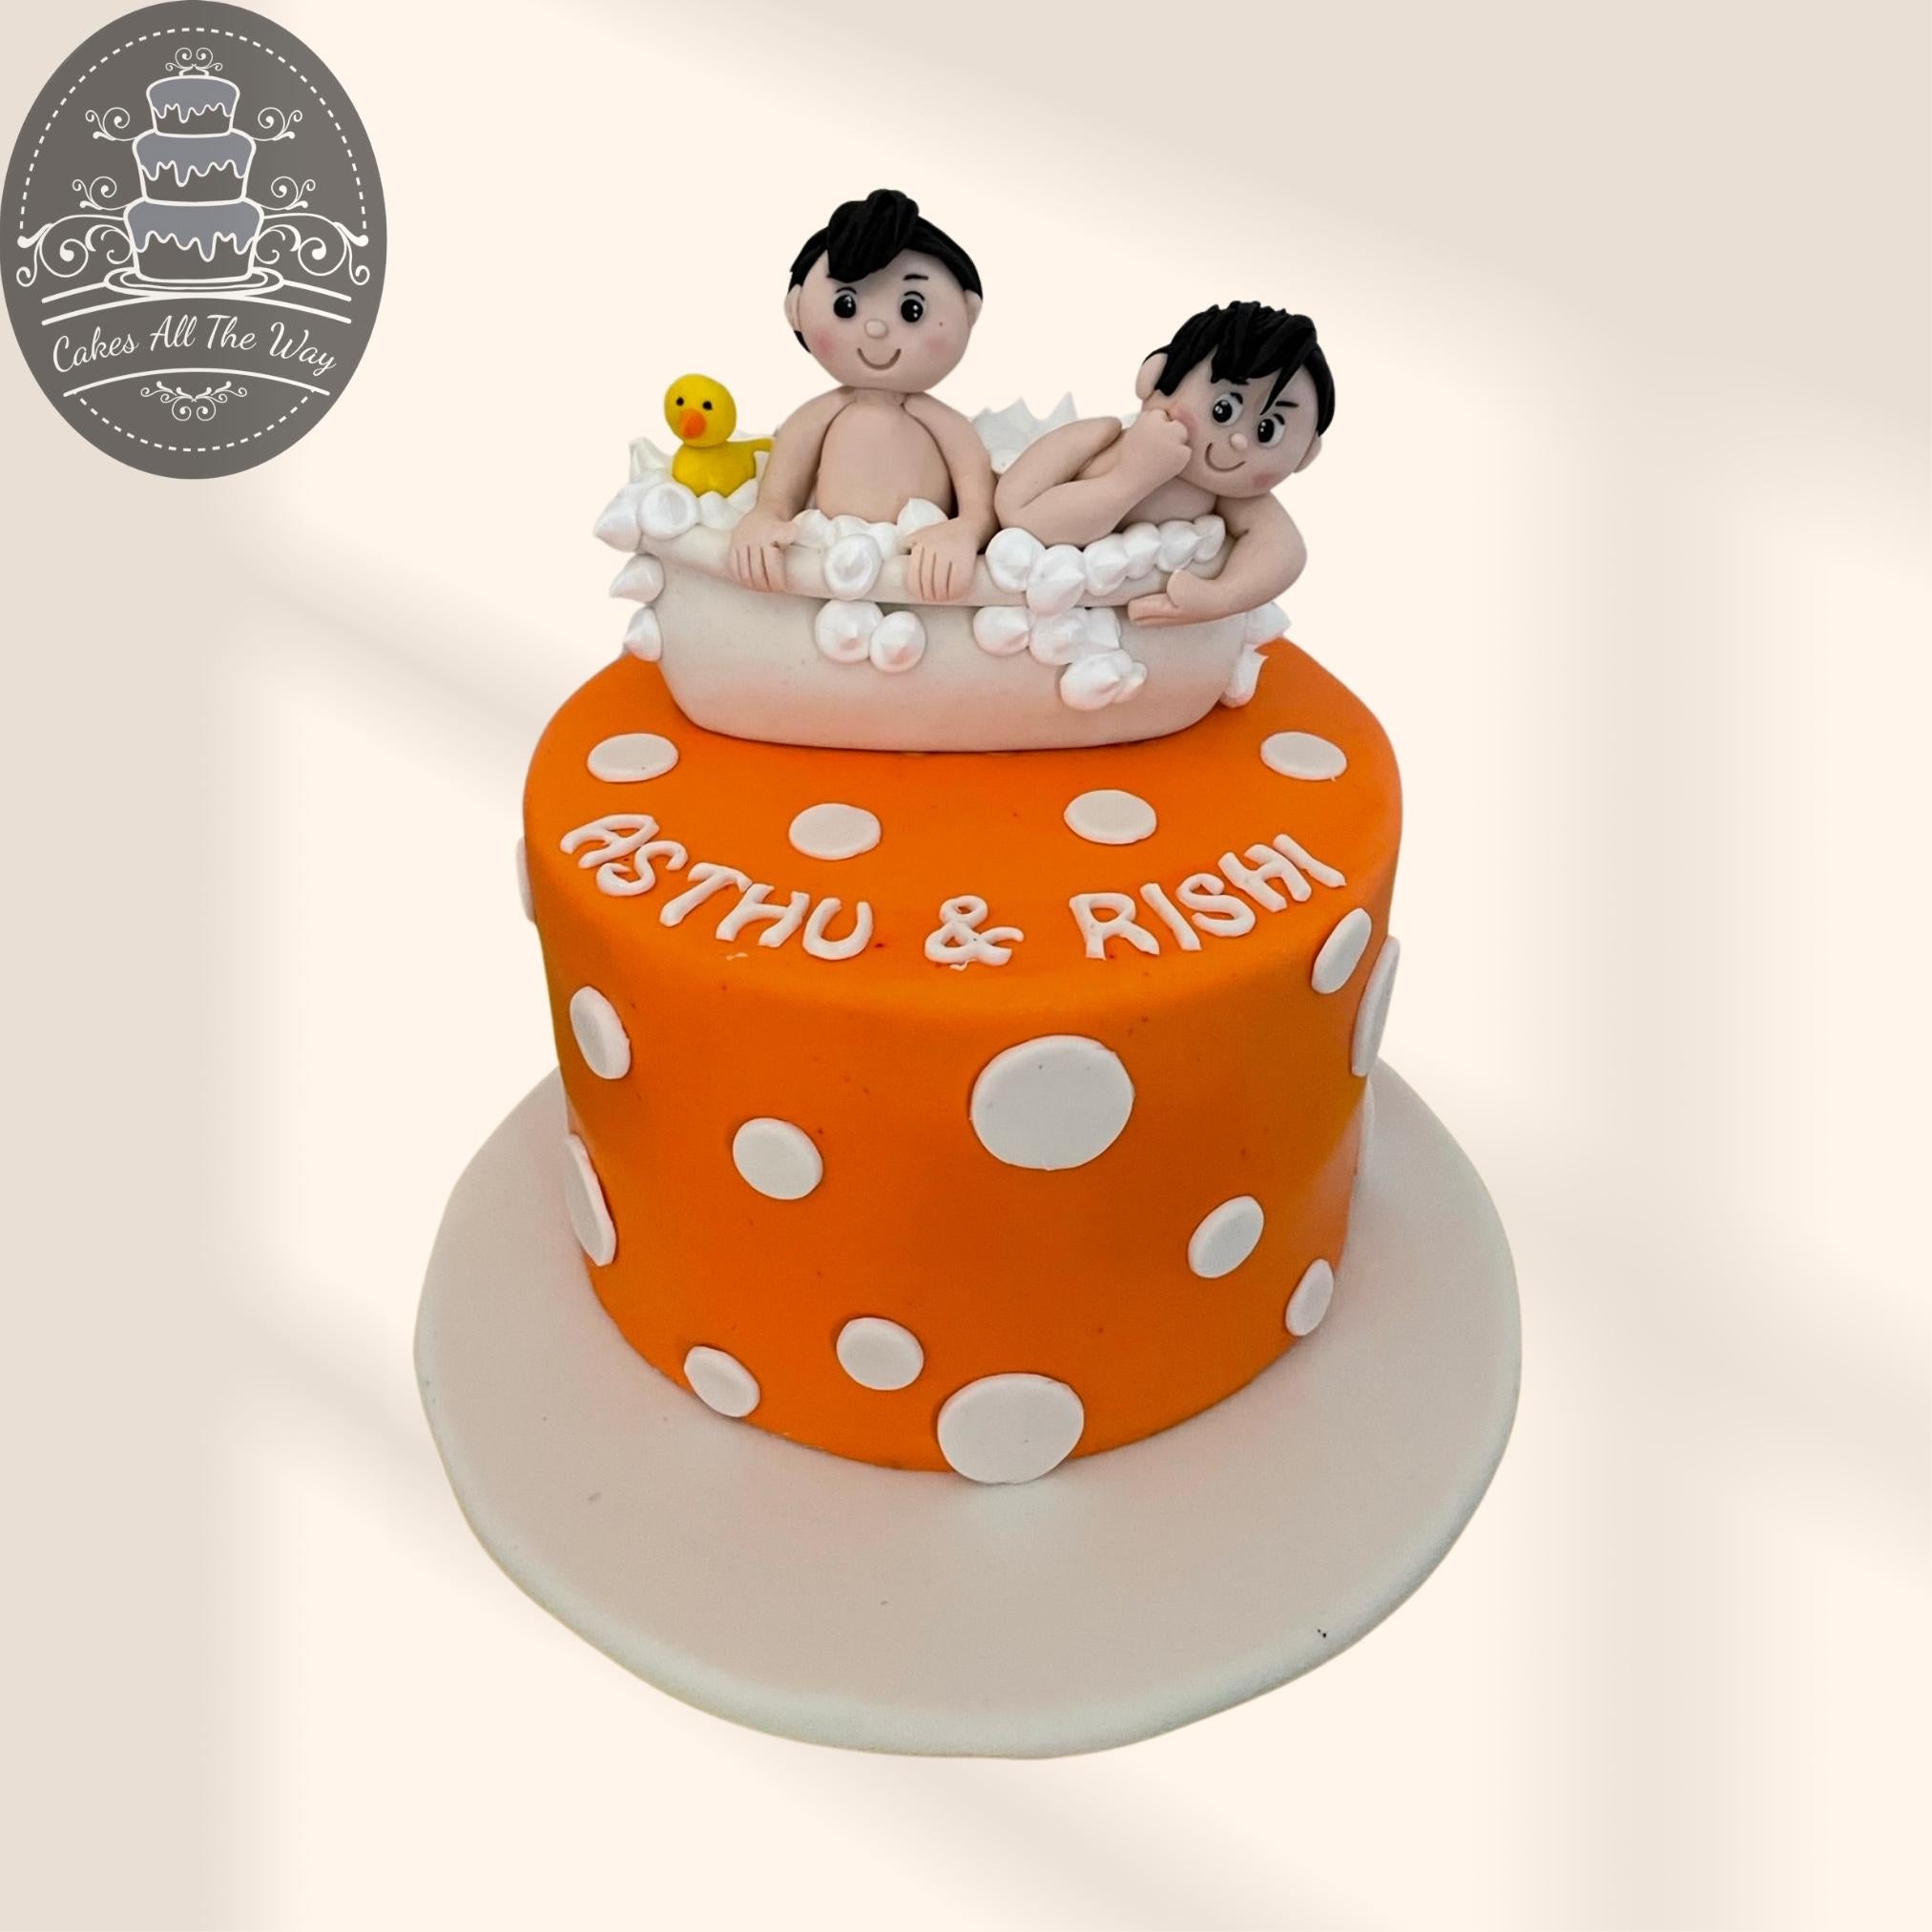 Sugar Bubble Birthday Cake | Plums and Roses Cakes and Cookies's Blog